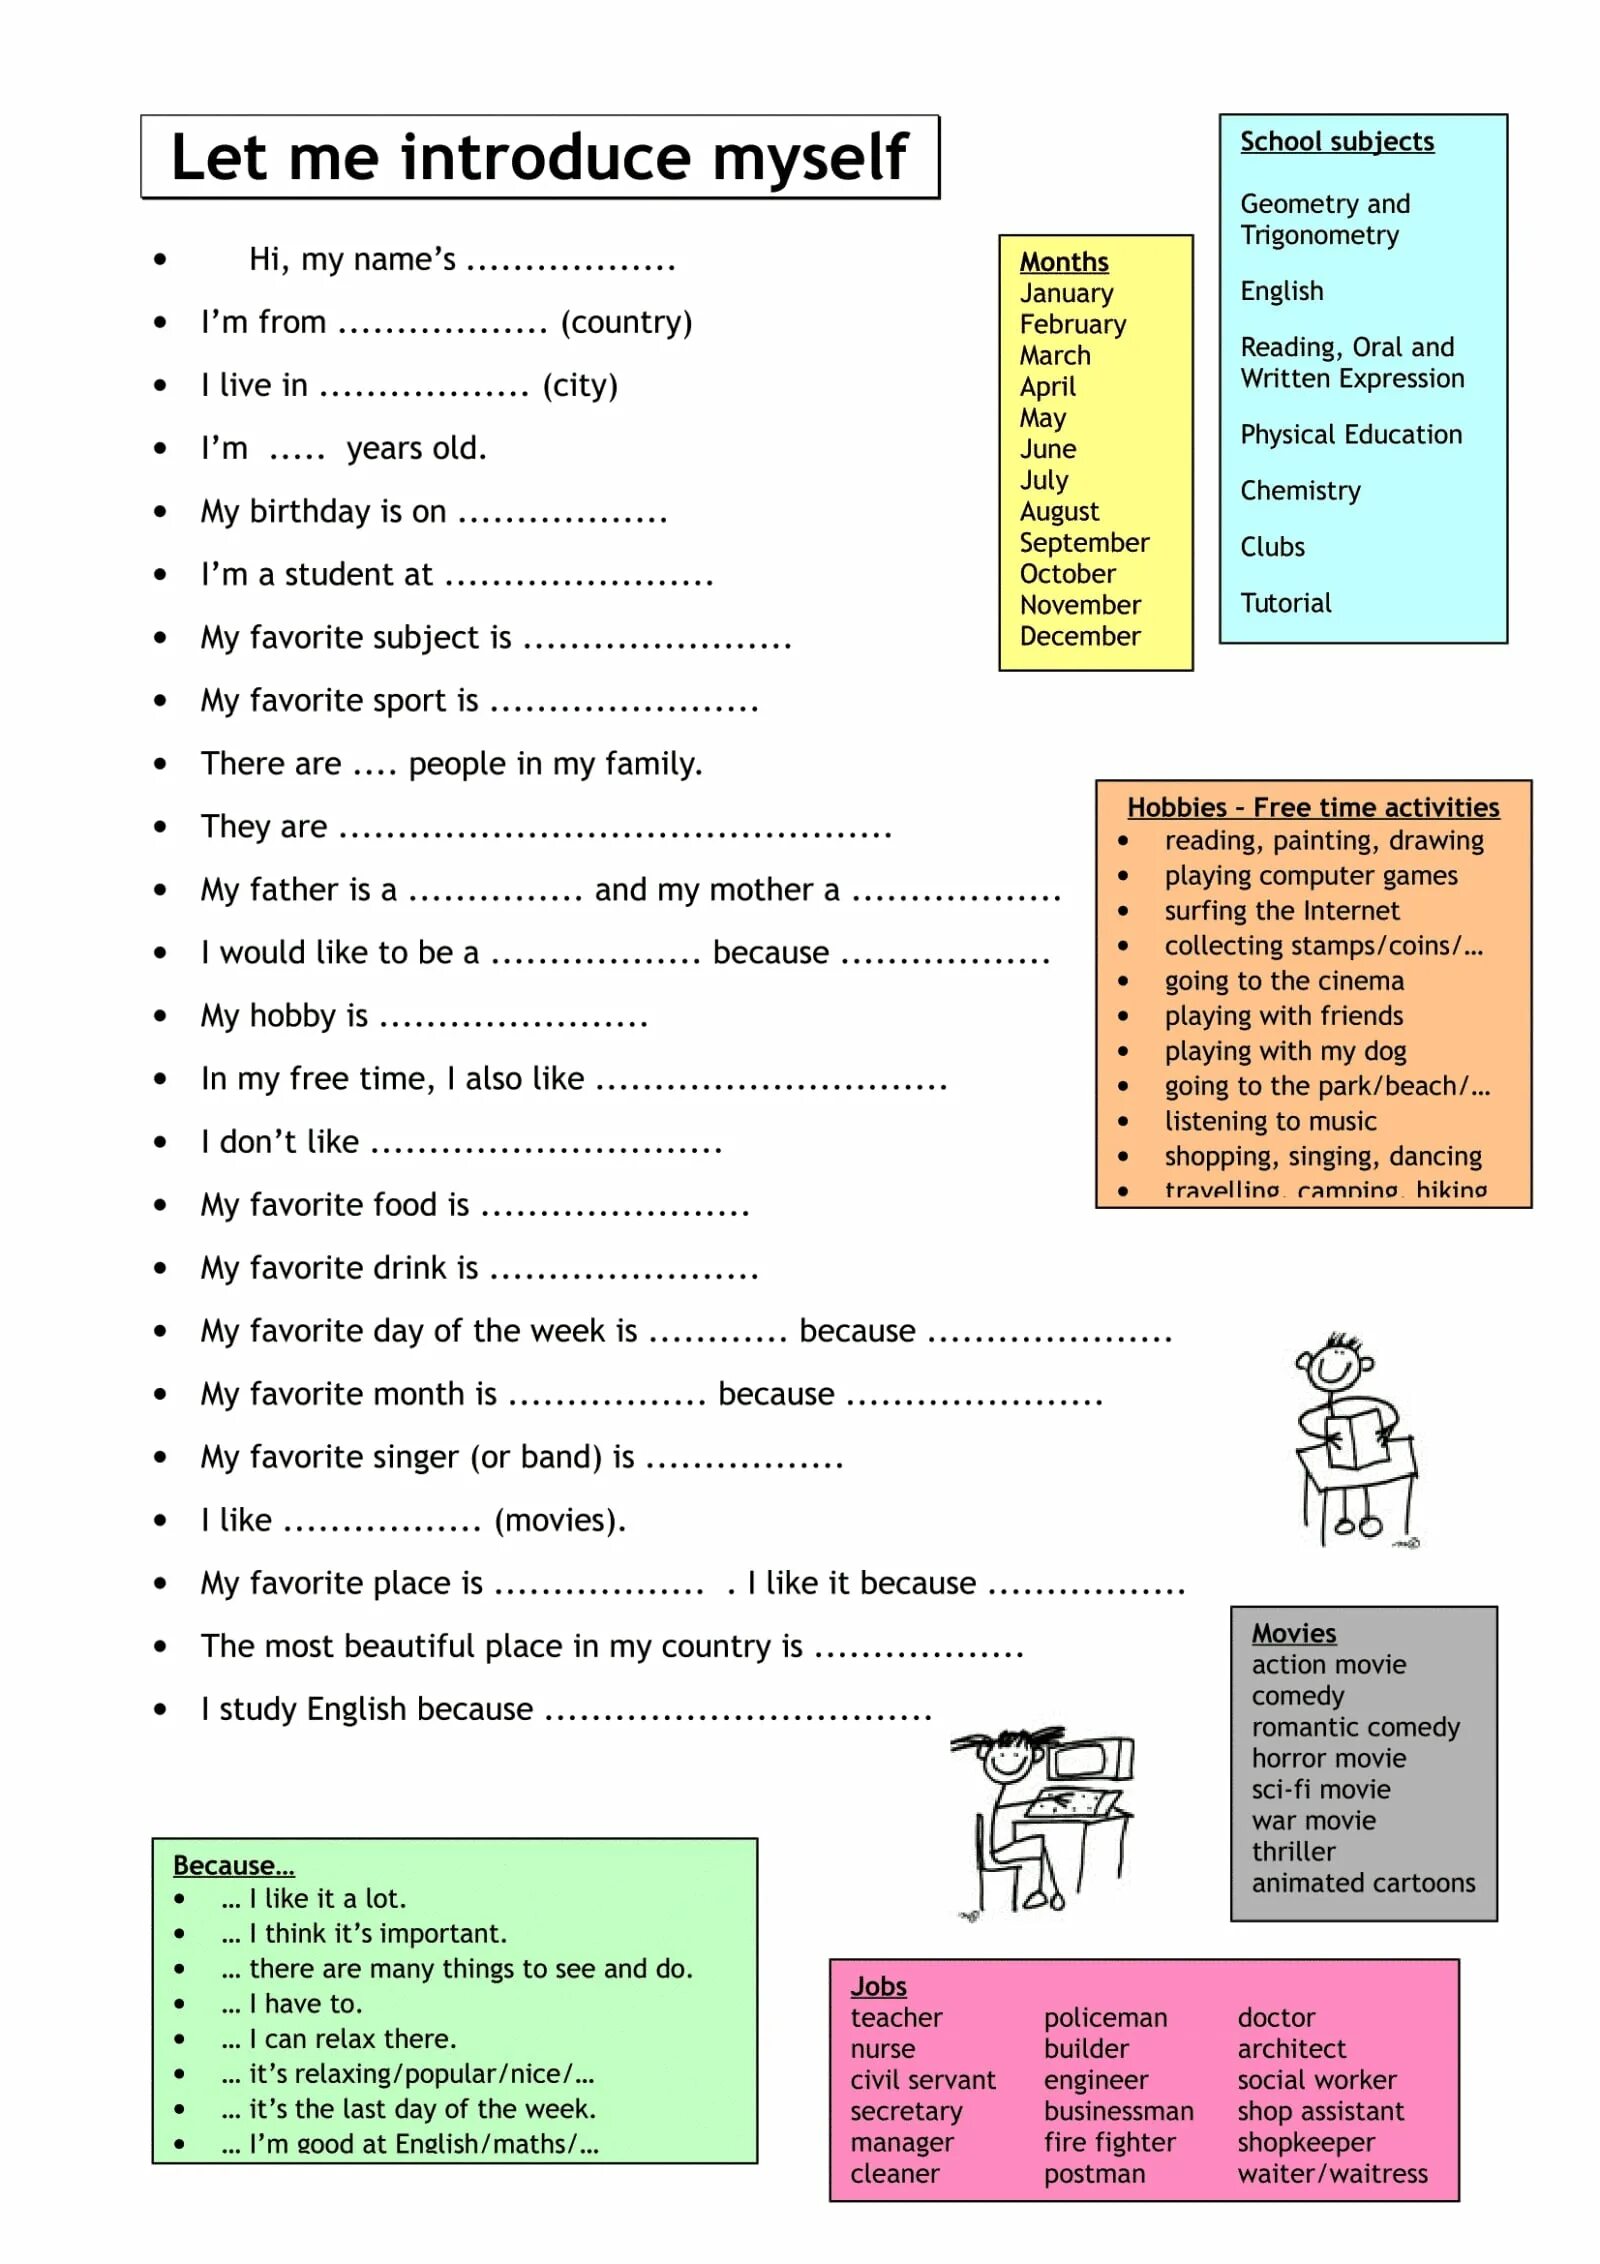 Questions about camps. Let me introduce myself карточка. Let me introduce myself Worksheet. Английский introduce yourself. Let me introduce myself 1 класс Worksheets.